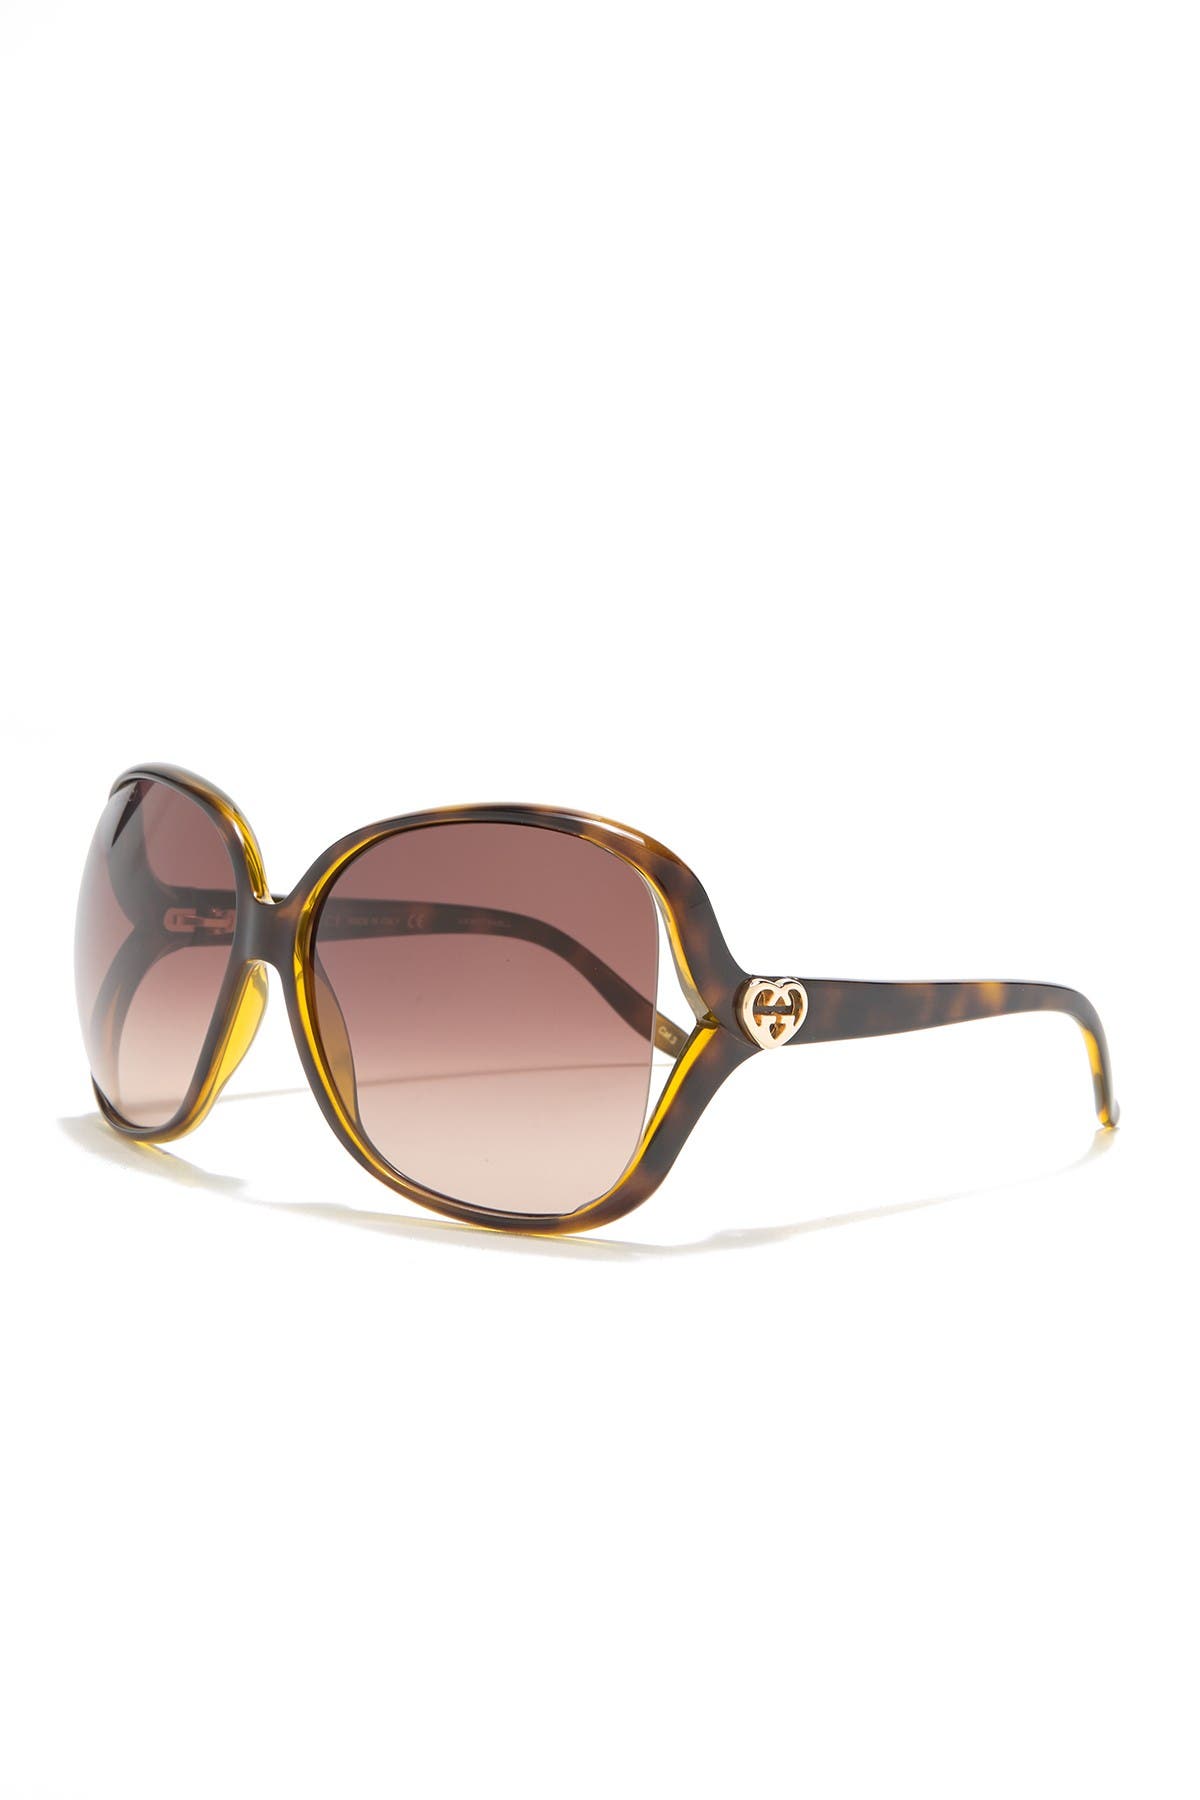 GUCCI | 60mm Oversized Square Sunglasses | Nordstrom Rack